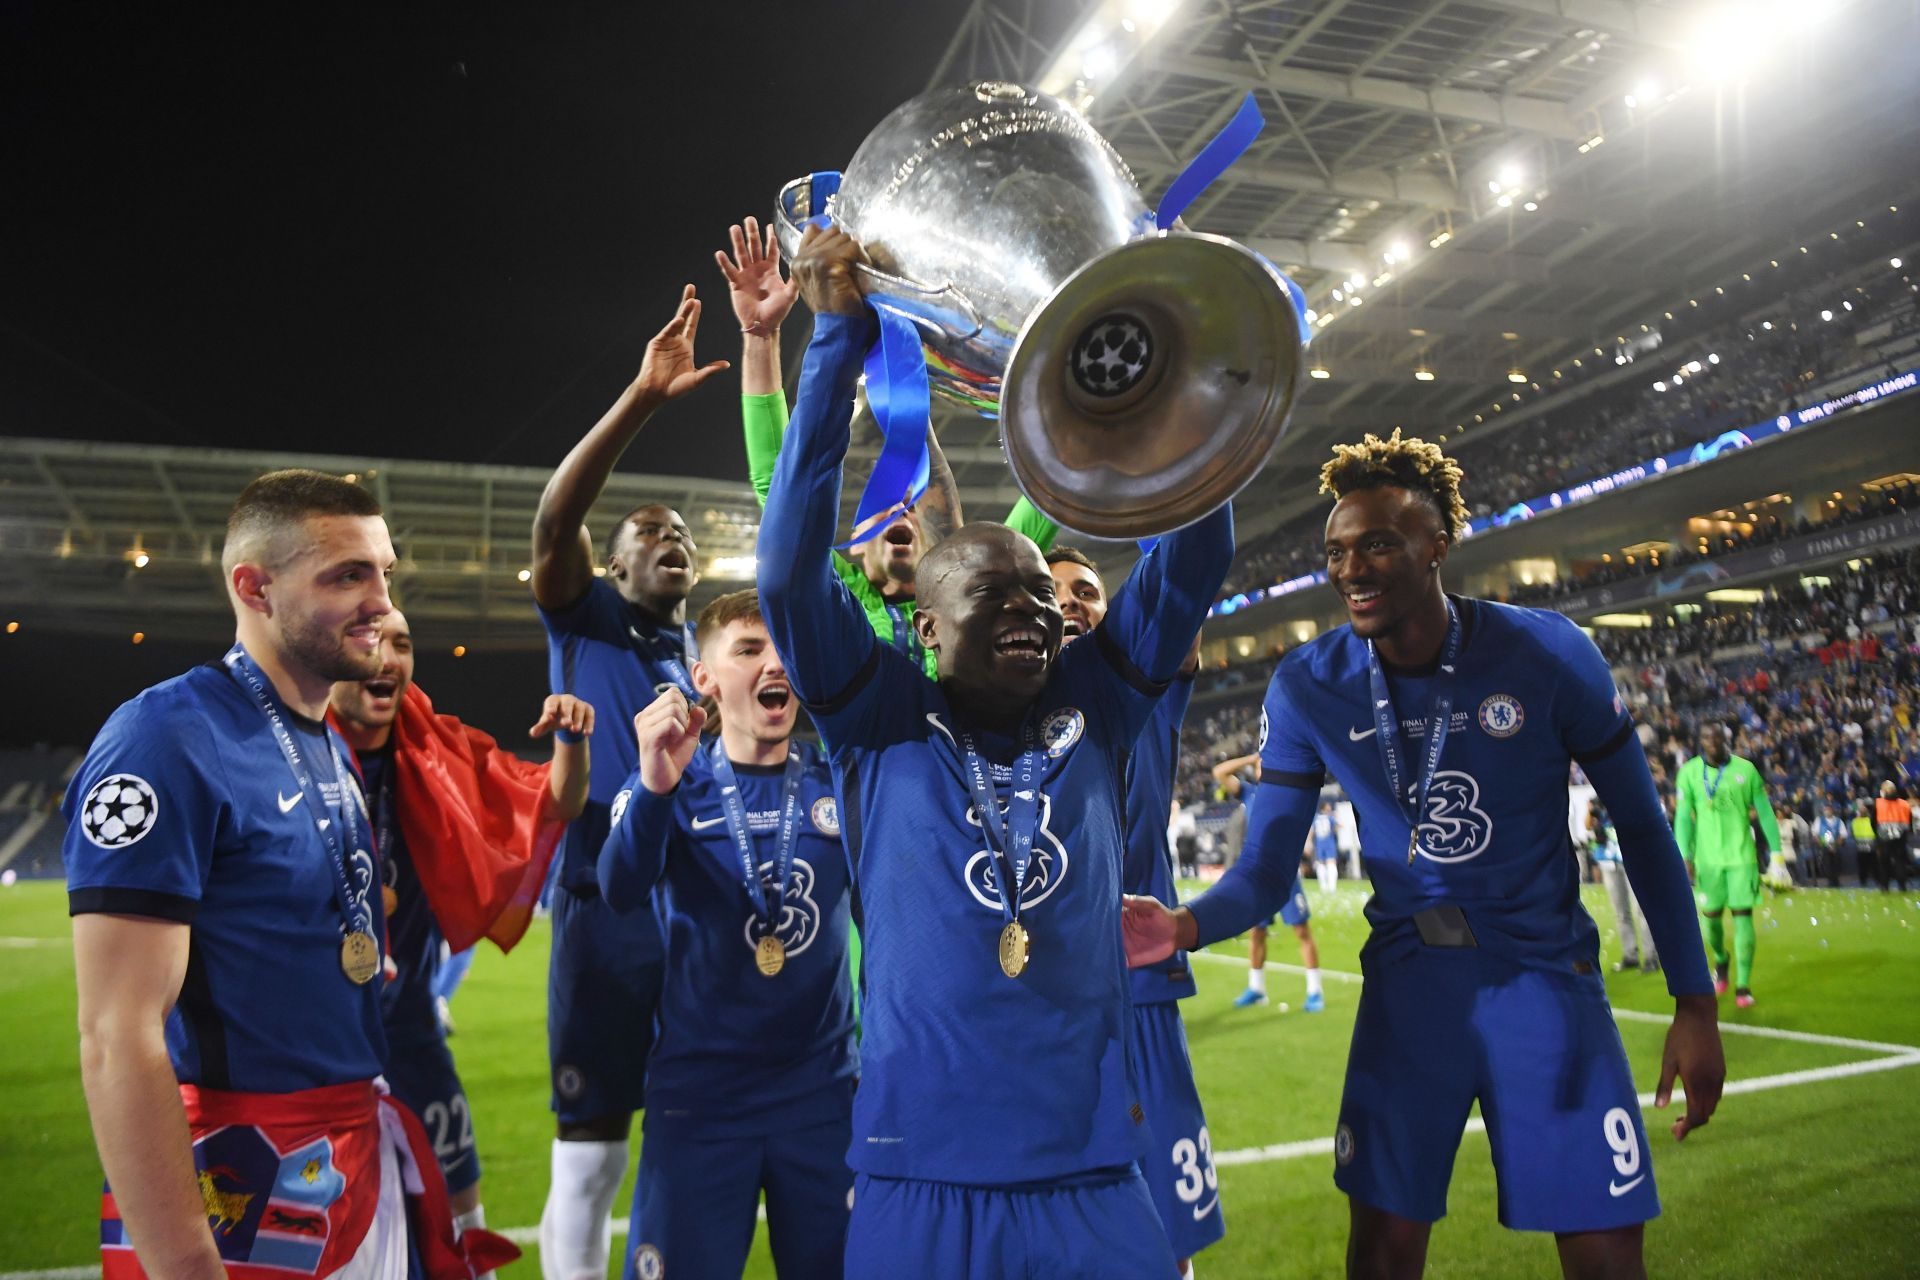 Chelsea FC star N&#039;Golo Kante has an outside chance of winning this year&#039;s Ballon d&#039;Or award